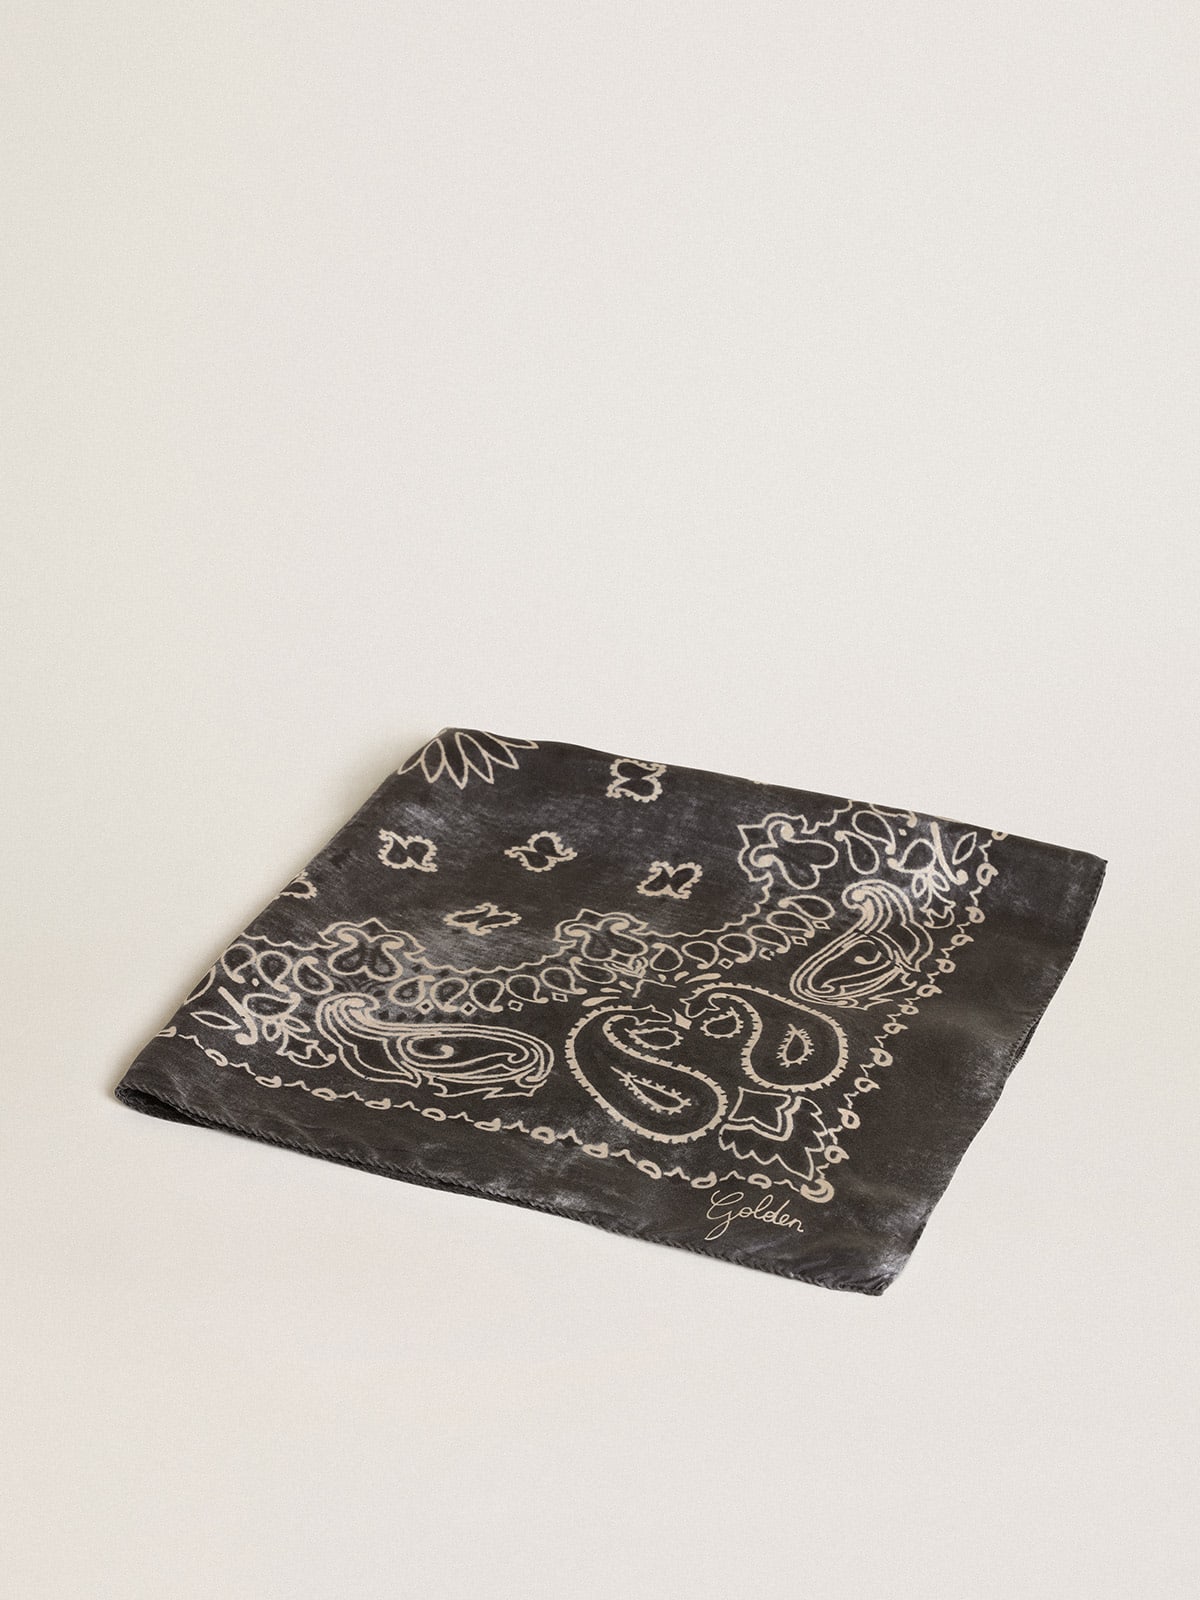 Golden Collection scarf in anthracite gray with paisley pattern